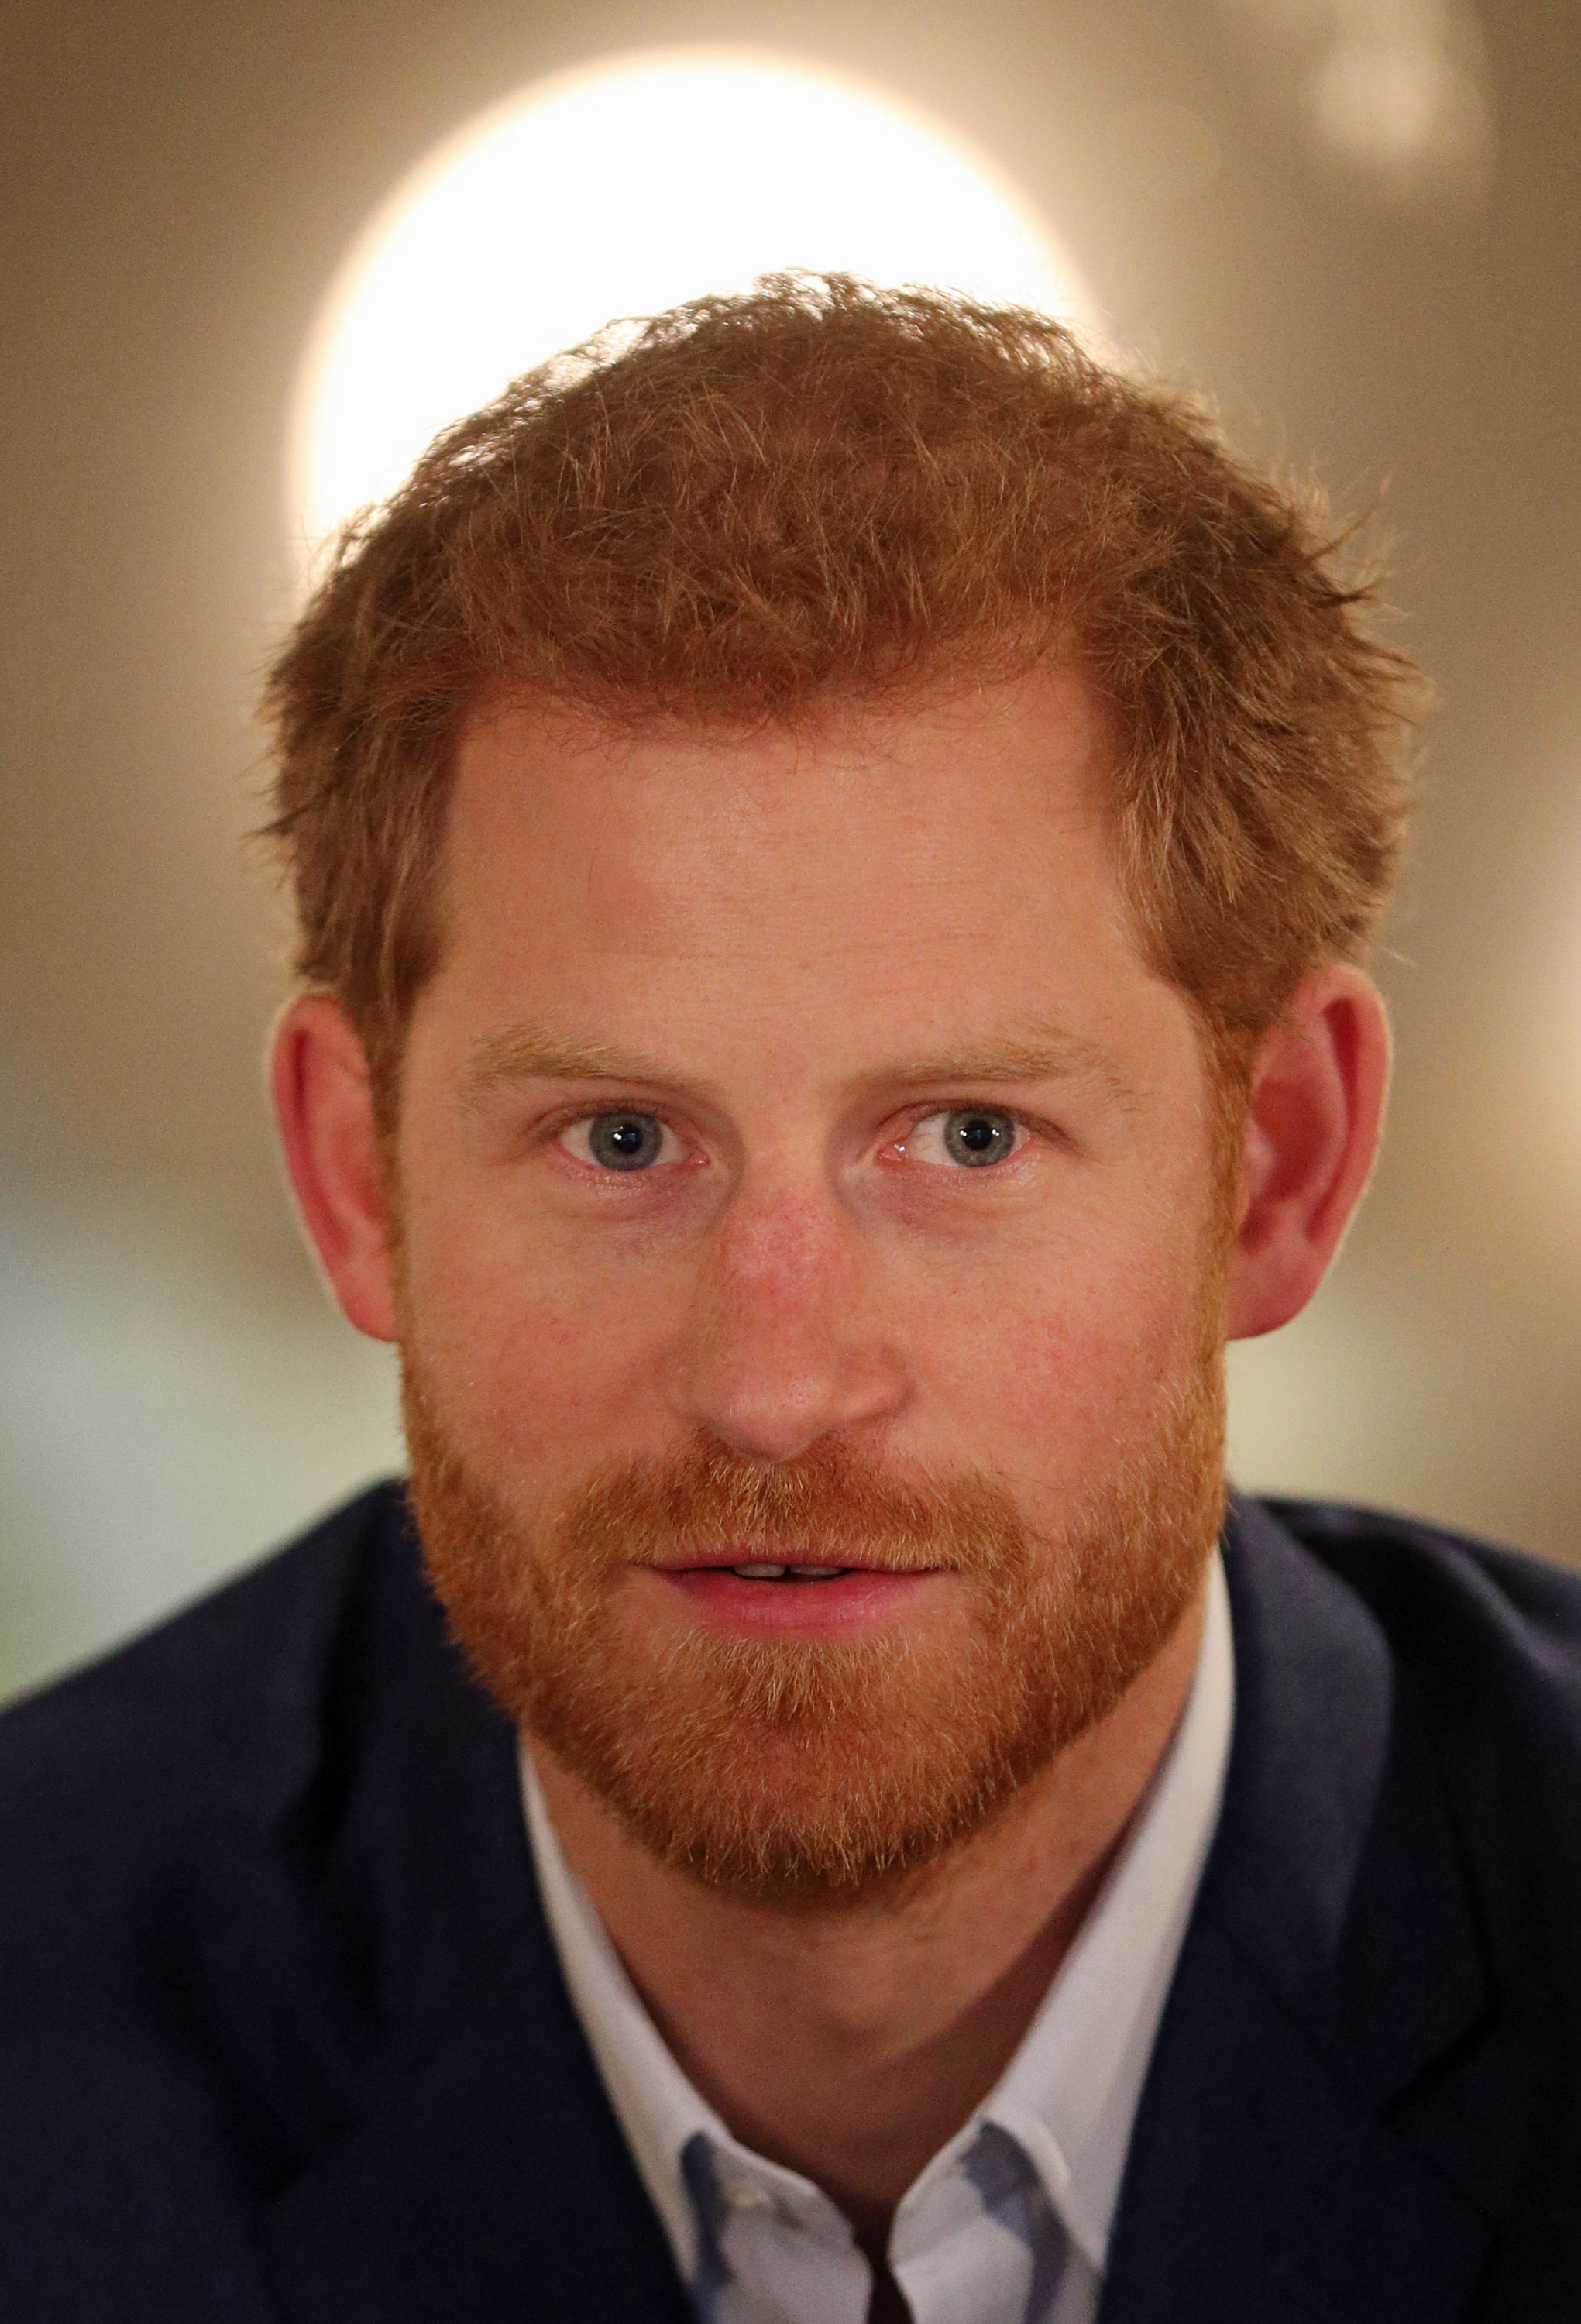 Prince Harry during his official visit to Copenhagen, Denmark, on October 26, 2017. | Source: Getty Images